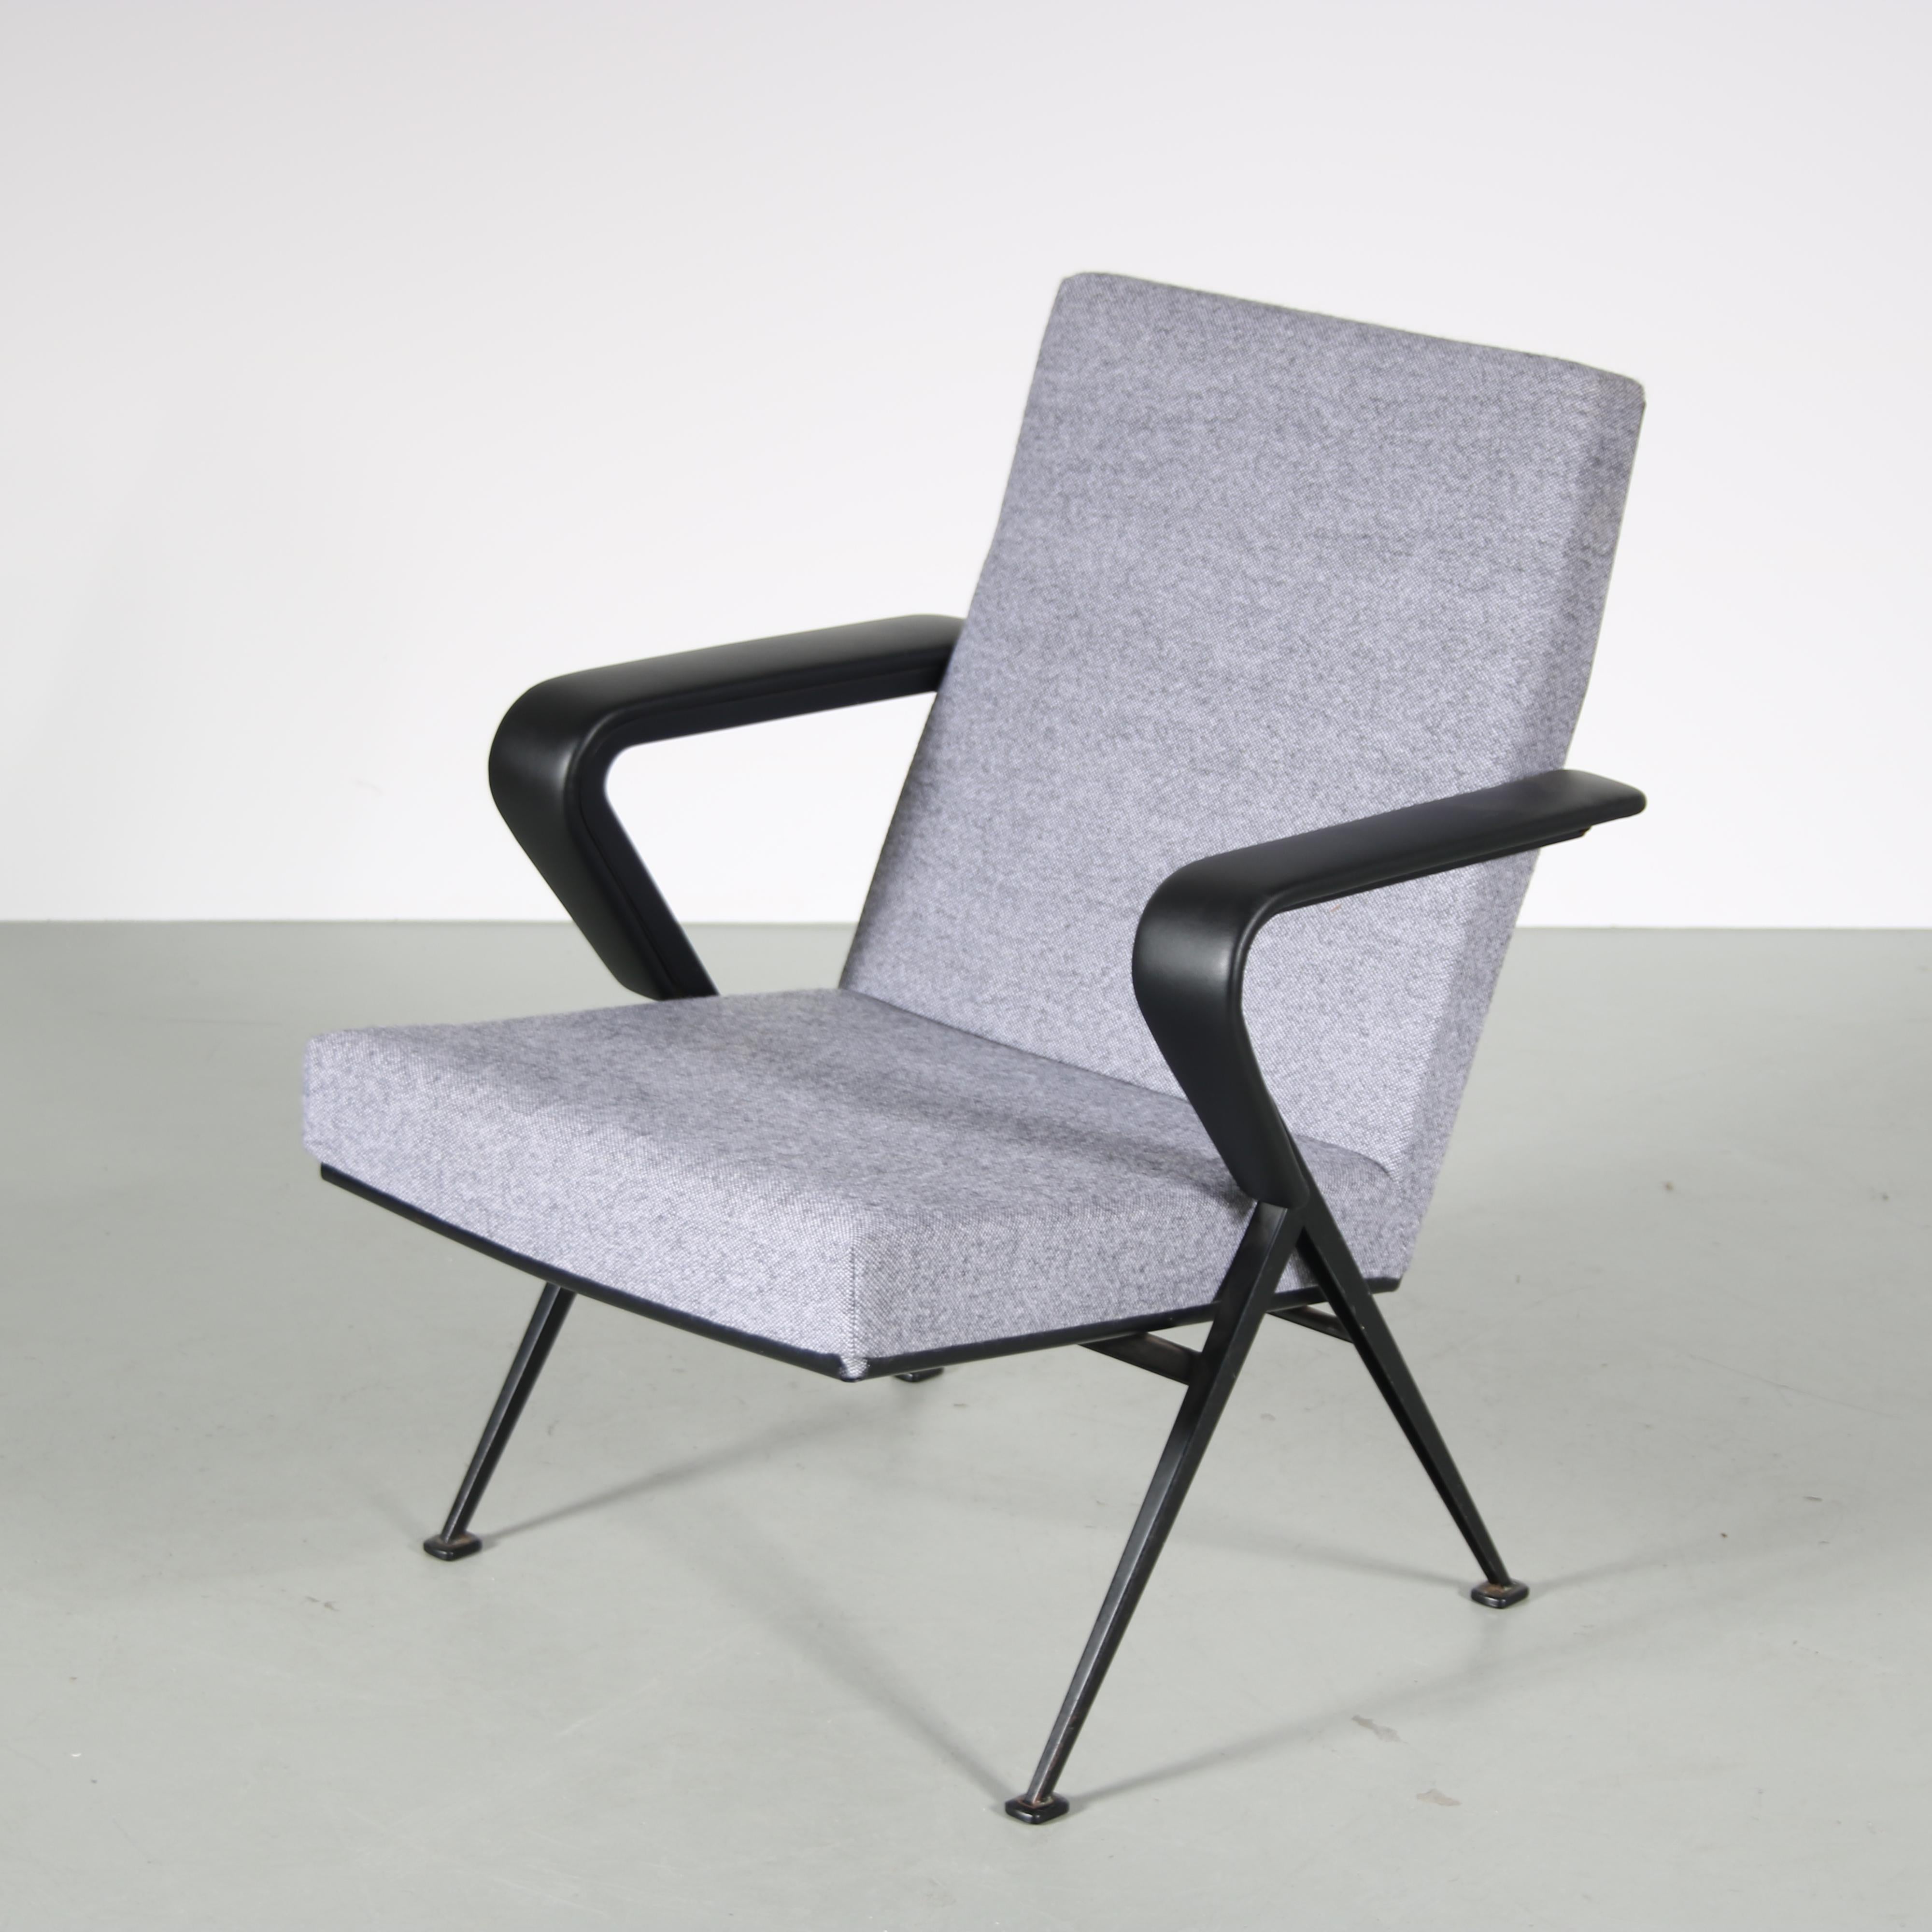 1960s Pair of “Repose” Chairs by Friso Kramer for Ahrend de Cirkel, Netherlands For Sale 2